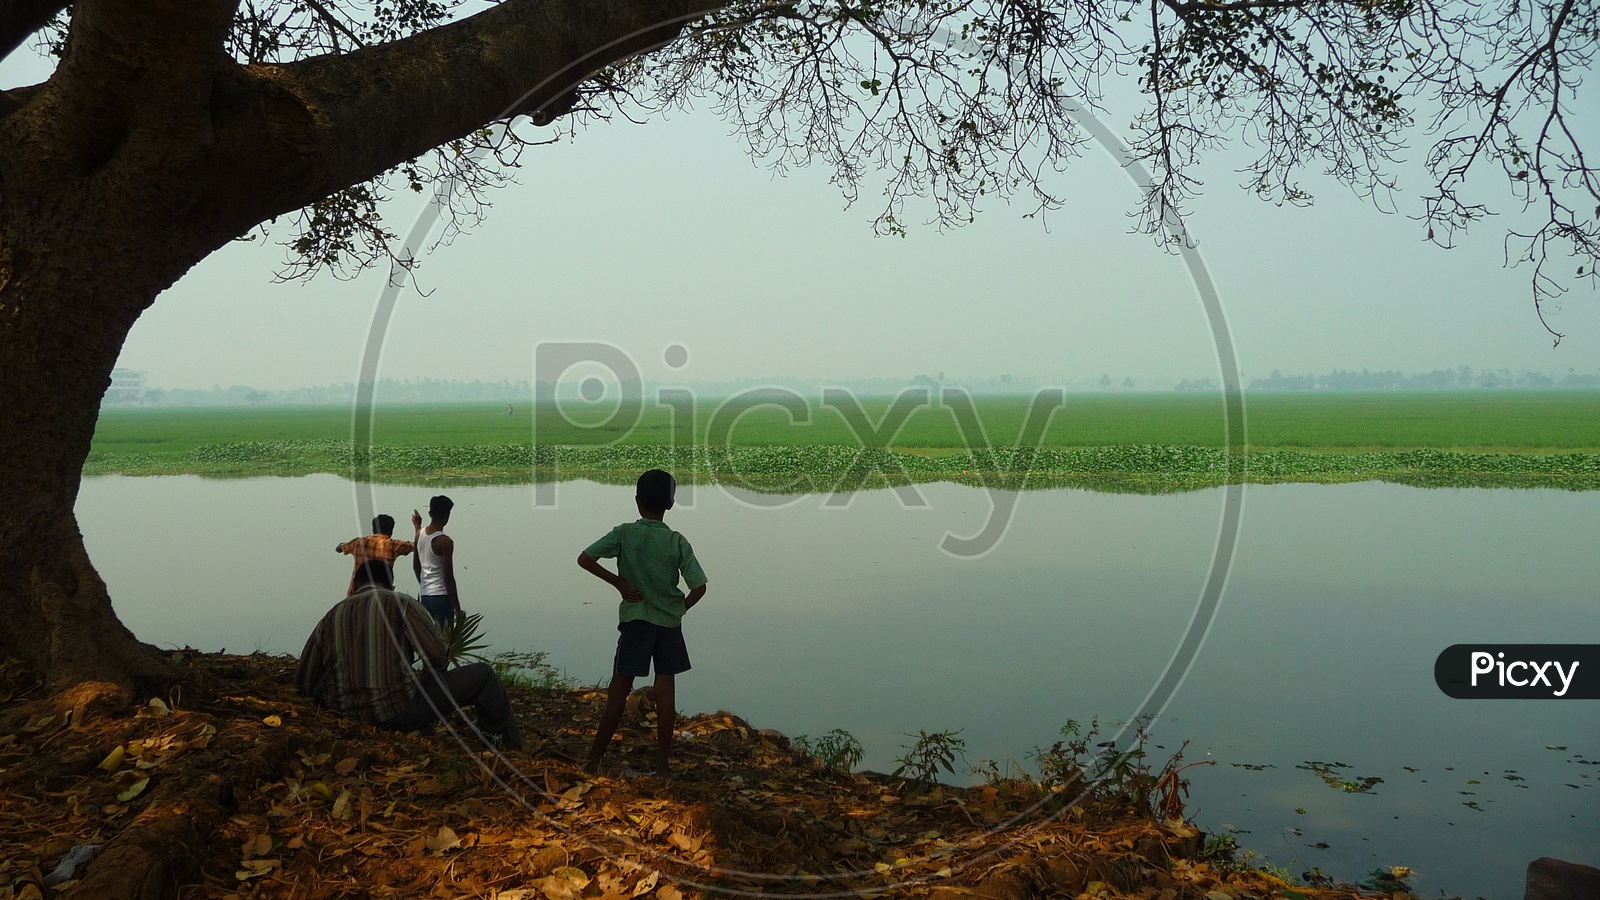 Kids near Agriculture Field